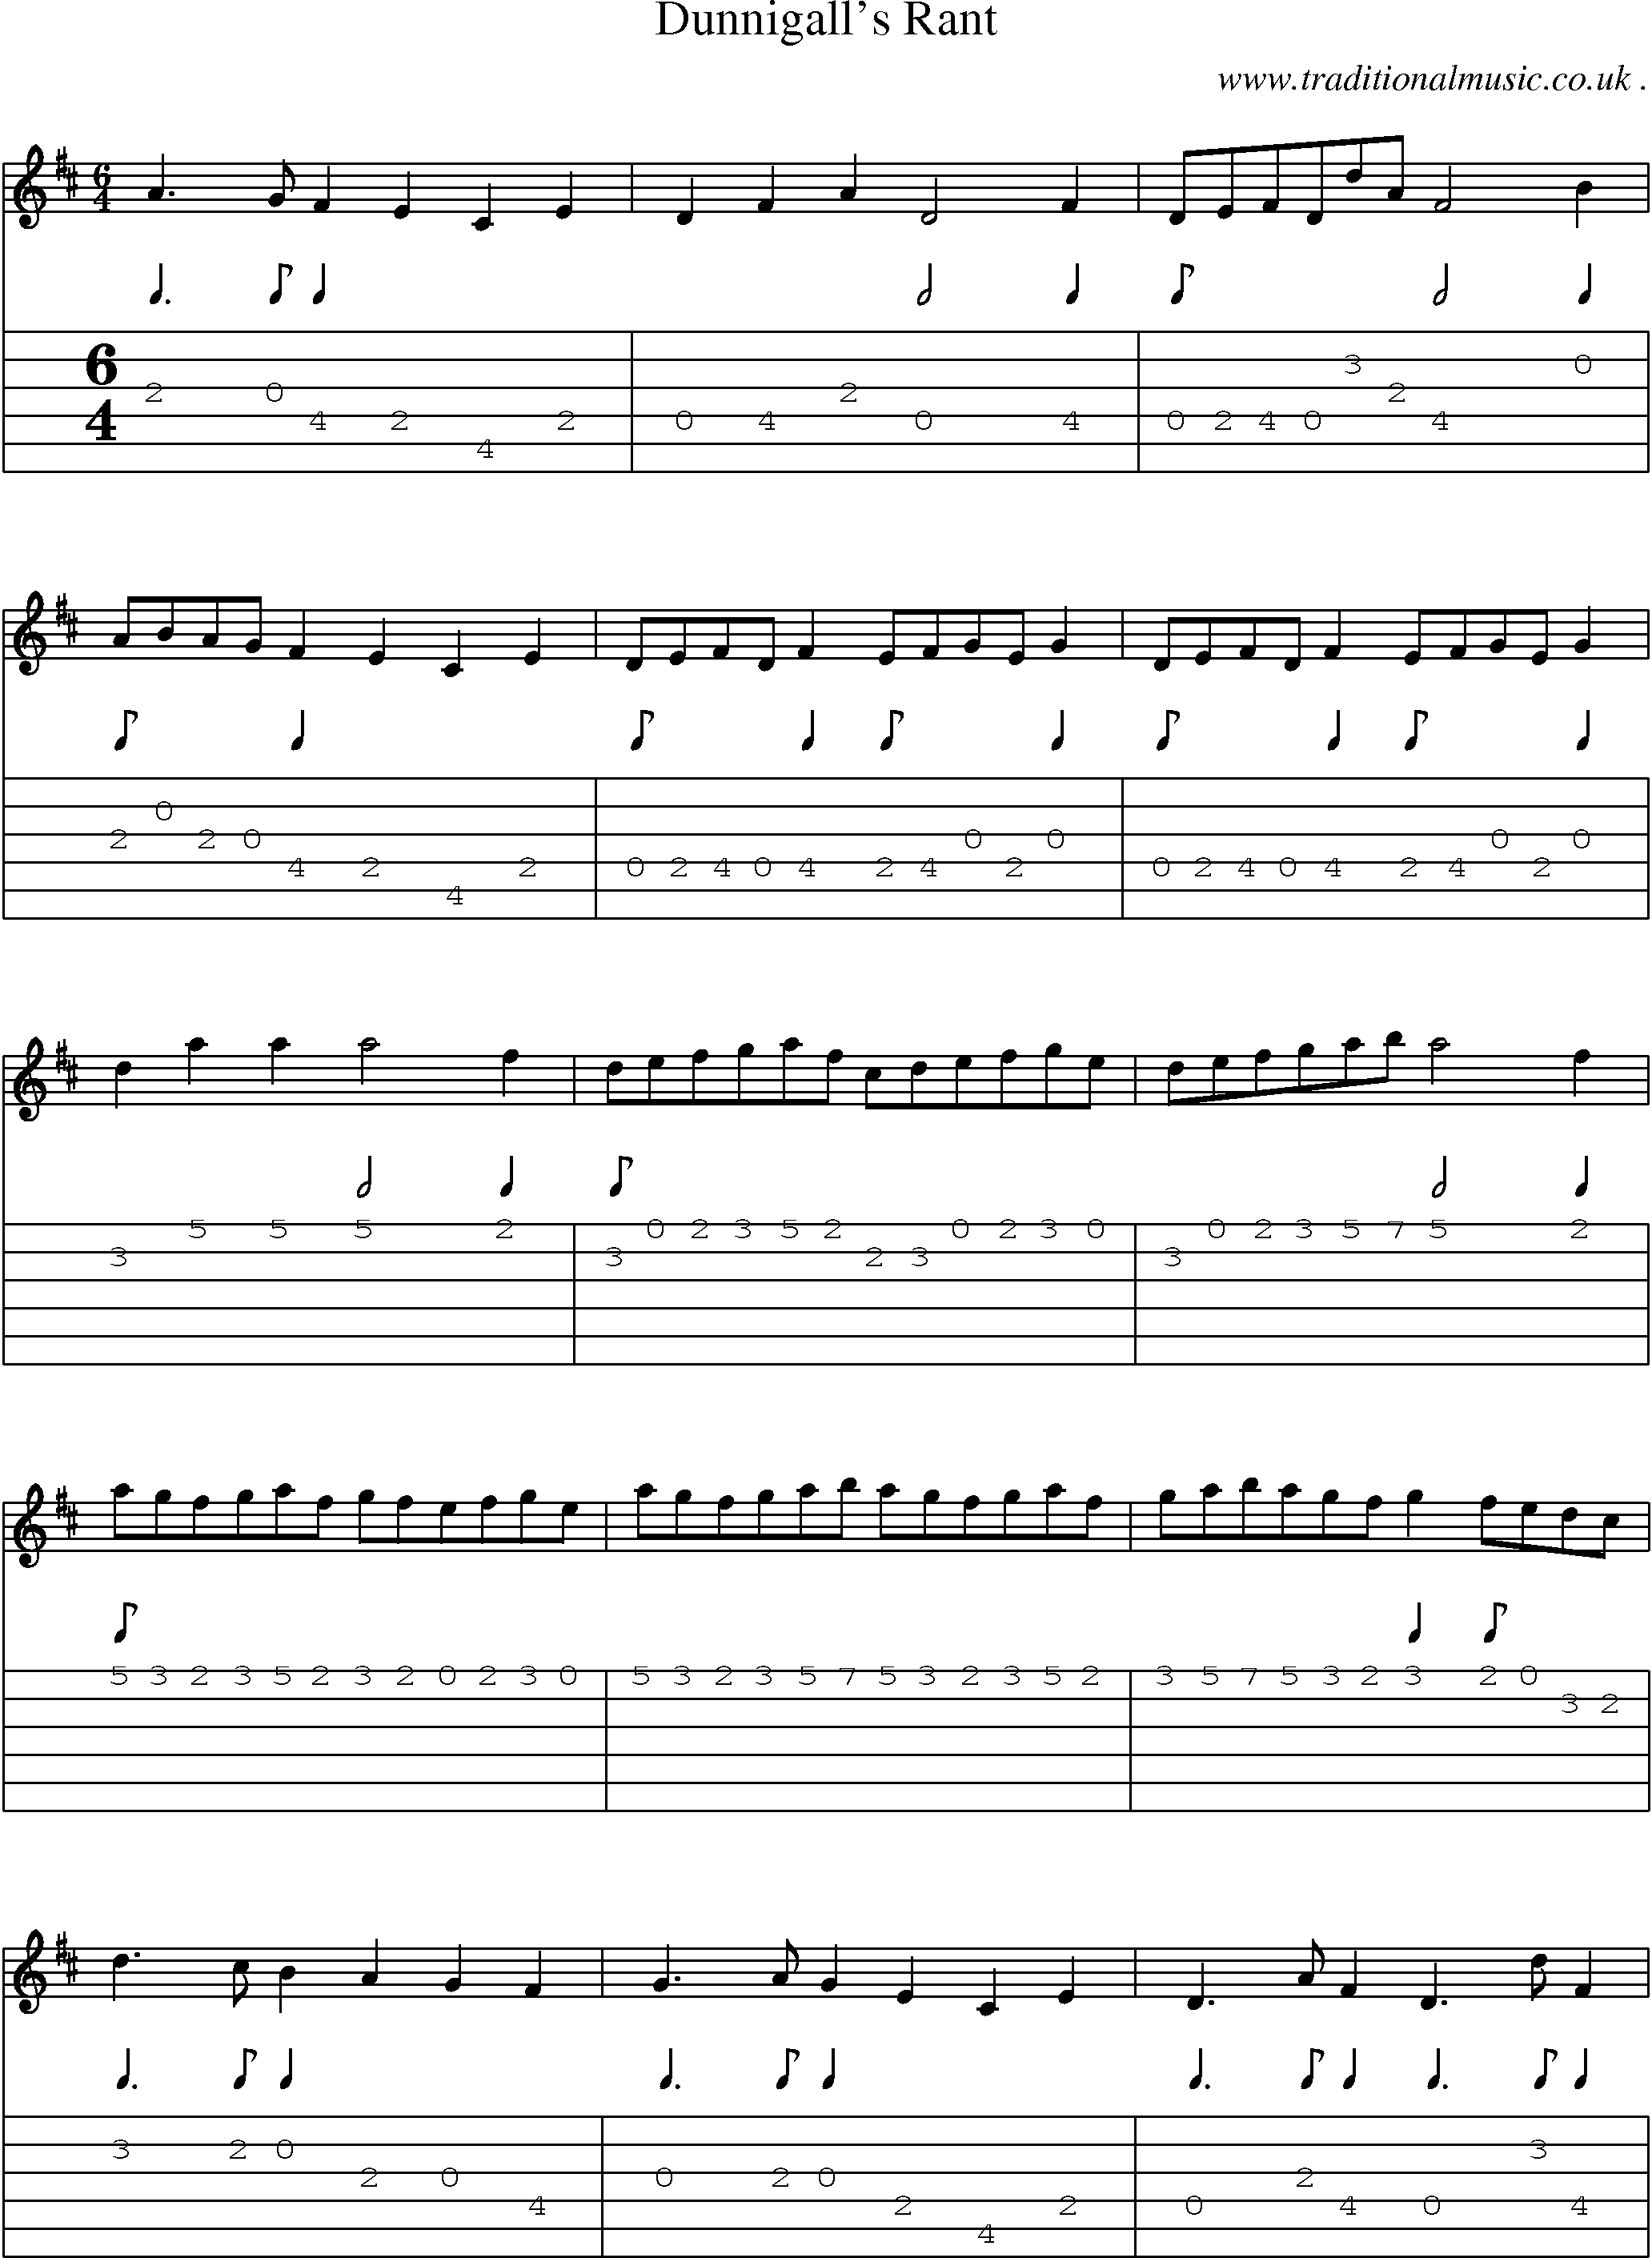 Sheet-Music and Guitar Tabs for Dunnigalls Rant